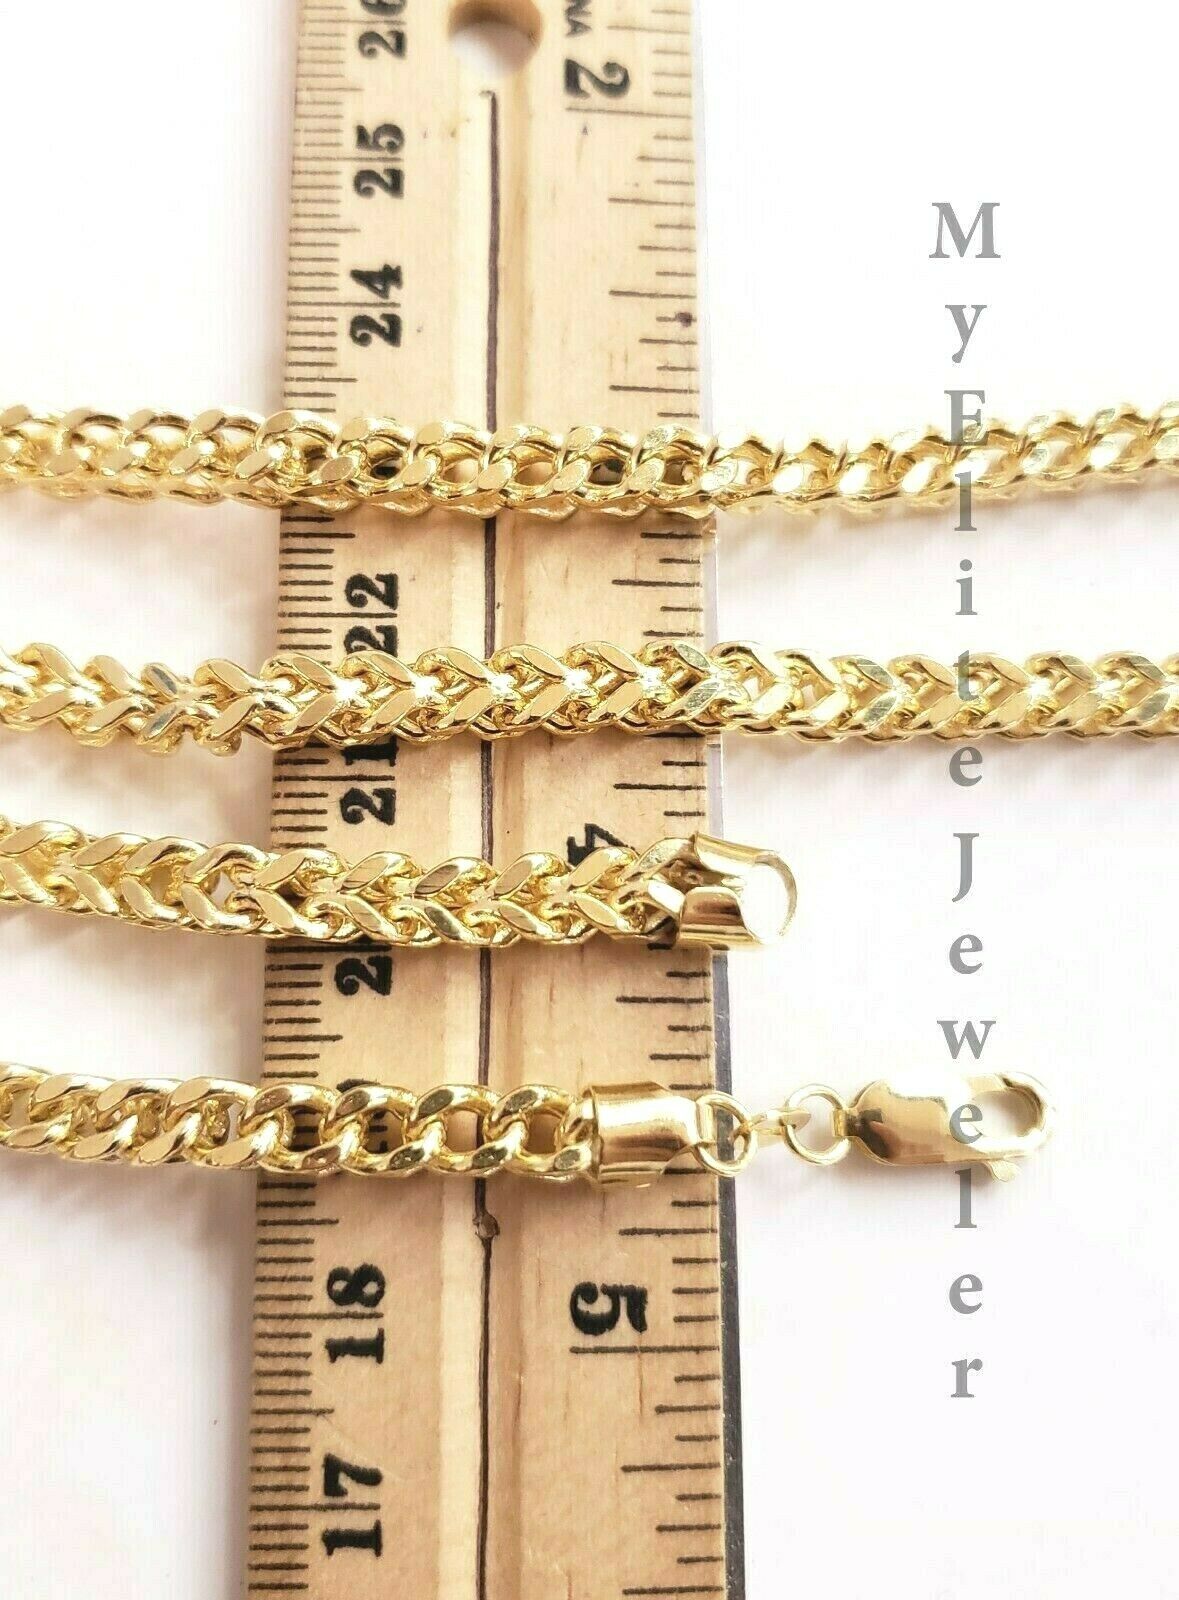 30" 5mm Gold Chain Necklace Franco 10k Yellow Gold Thick Strong REAL 10 KT Mens